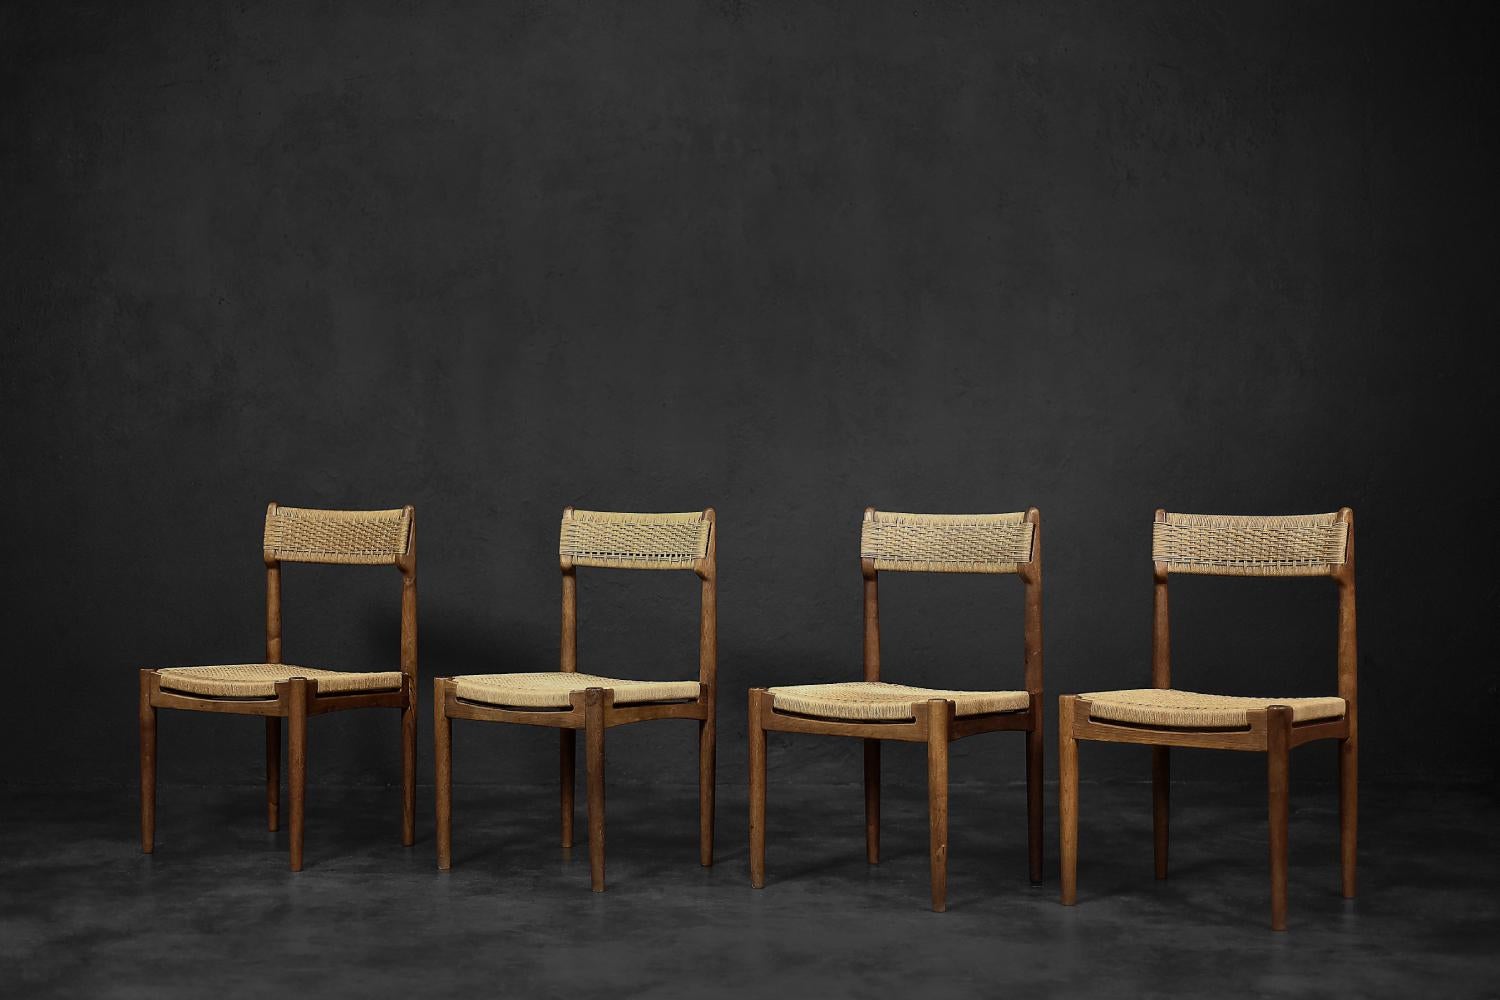 Danish Set of 4 Vintage Mid-Century Modern Scandinavian Dining Chairs in Oak&Paper Cord For Sale